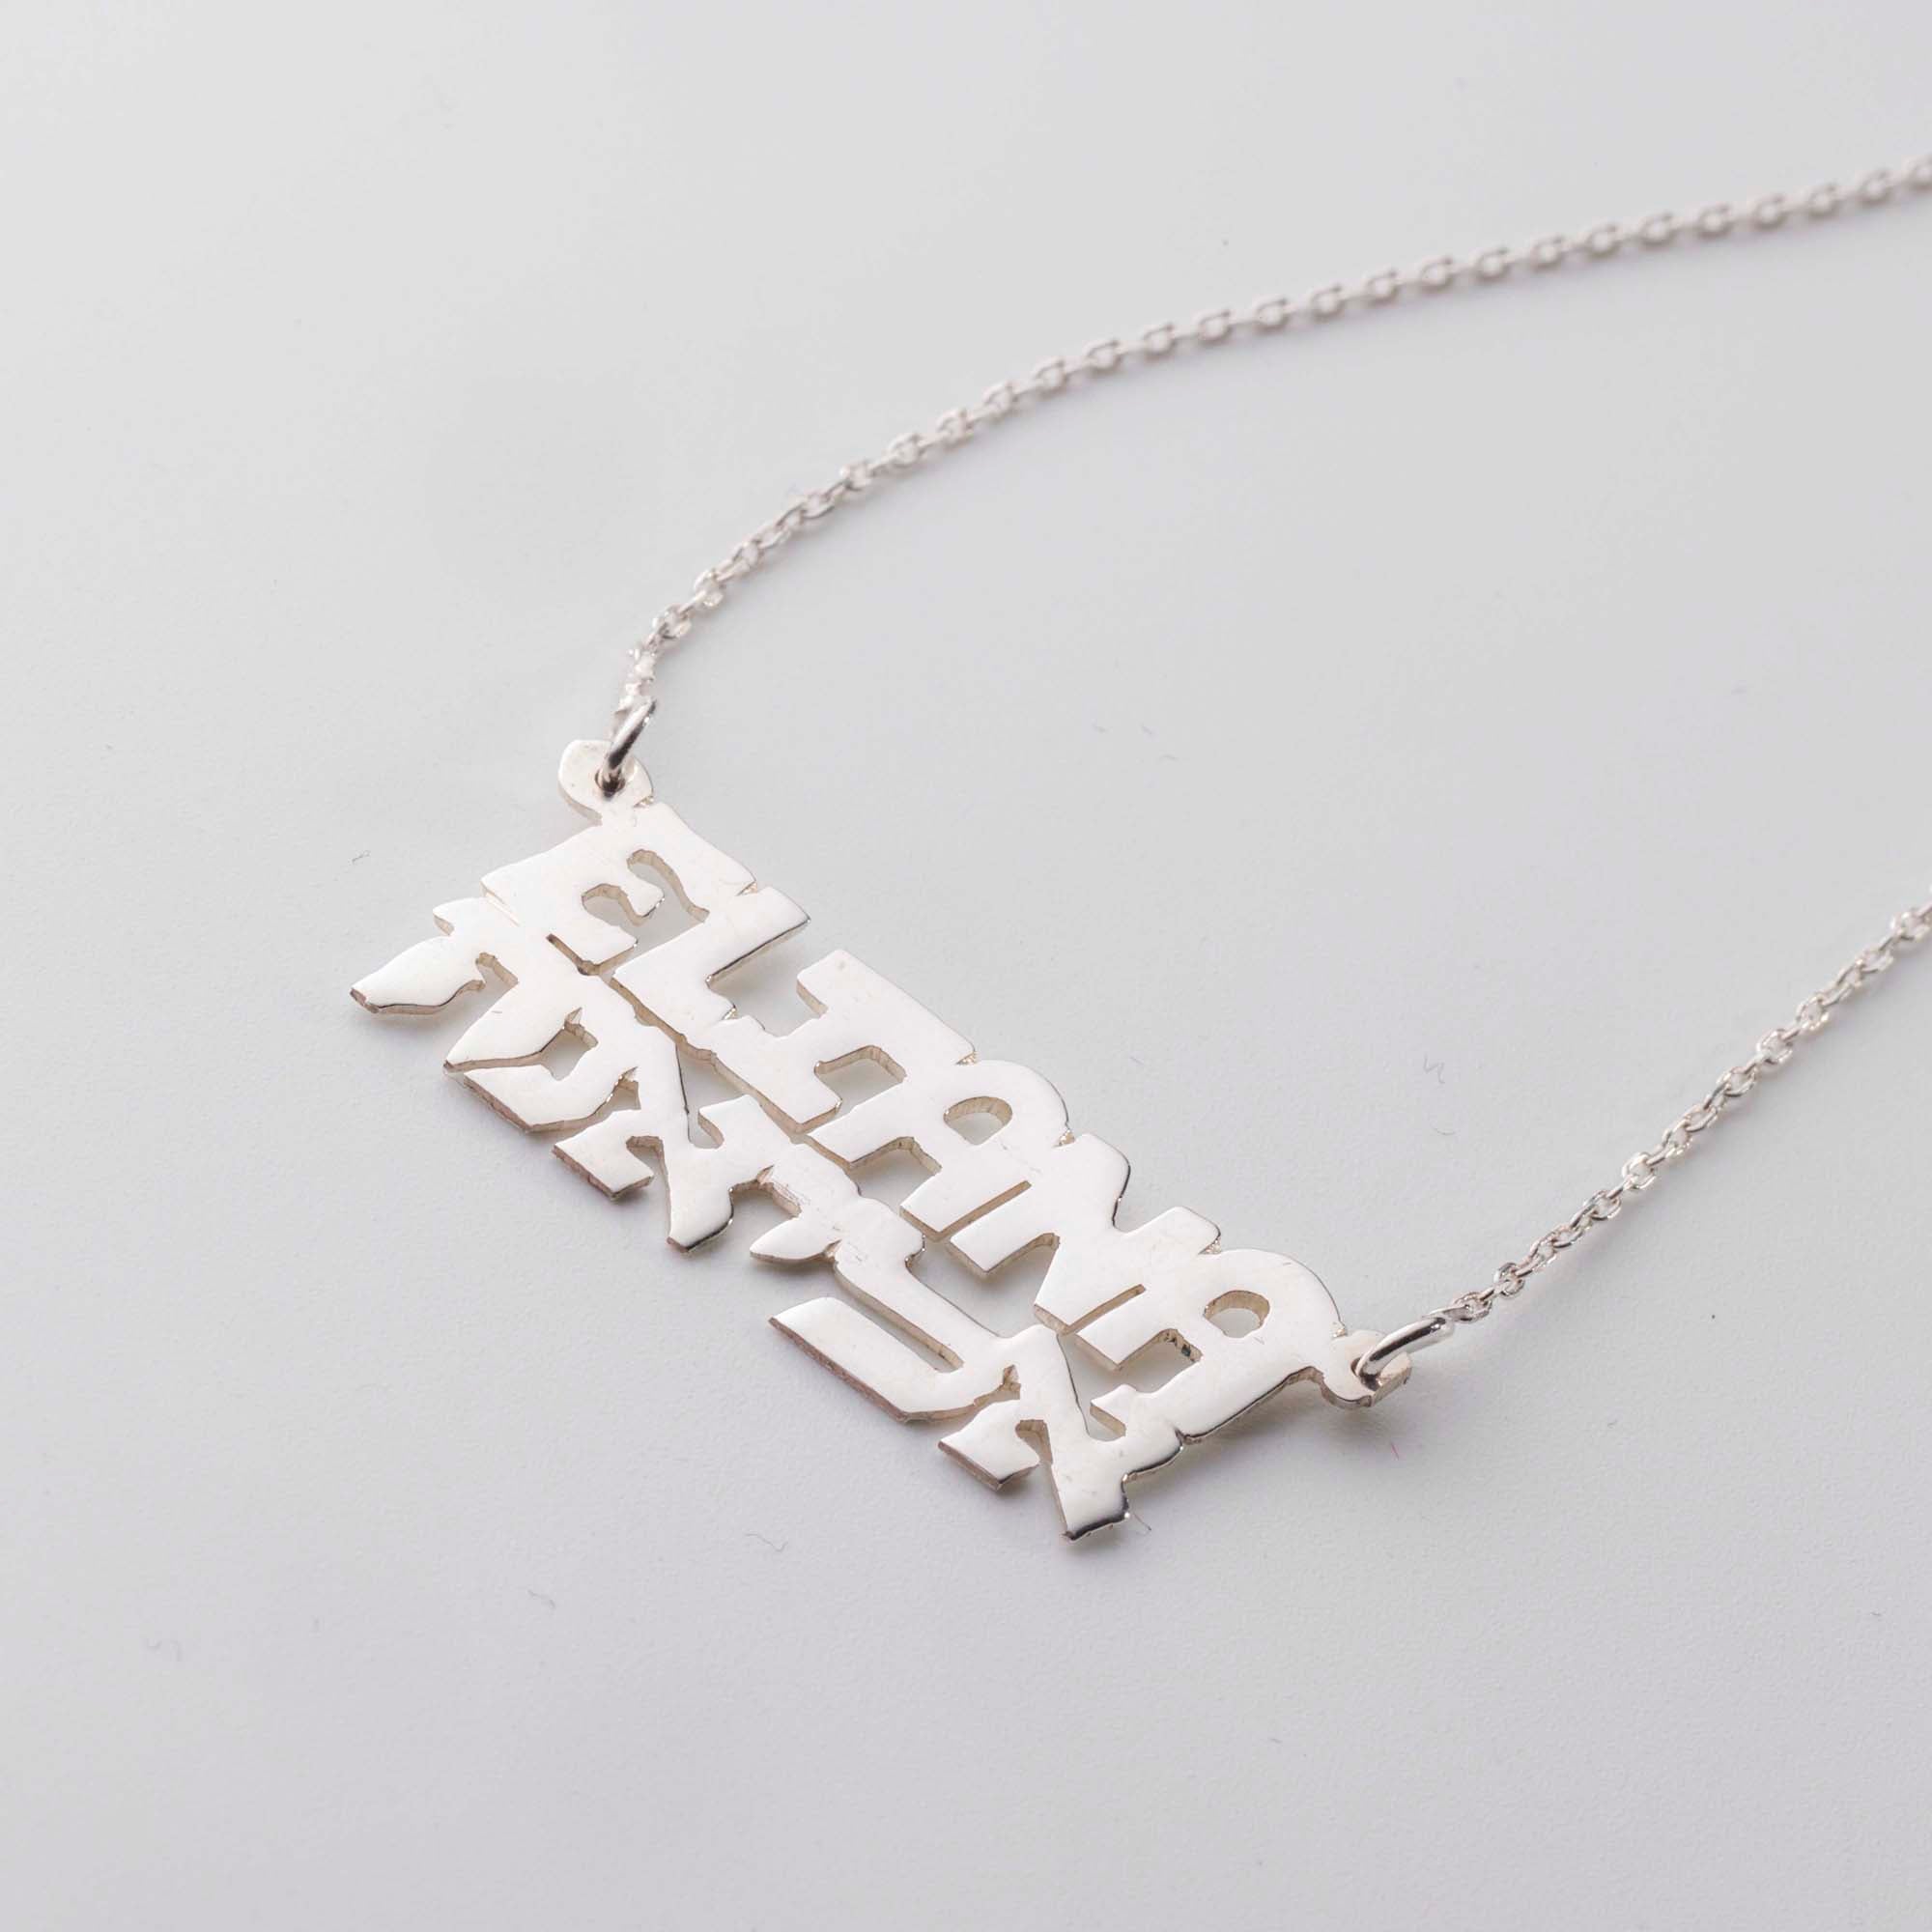 2 Names/Words necklace